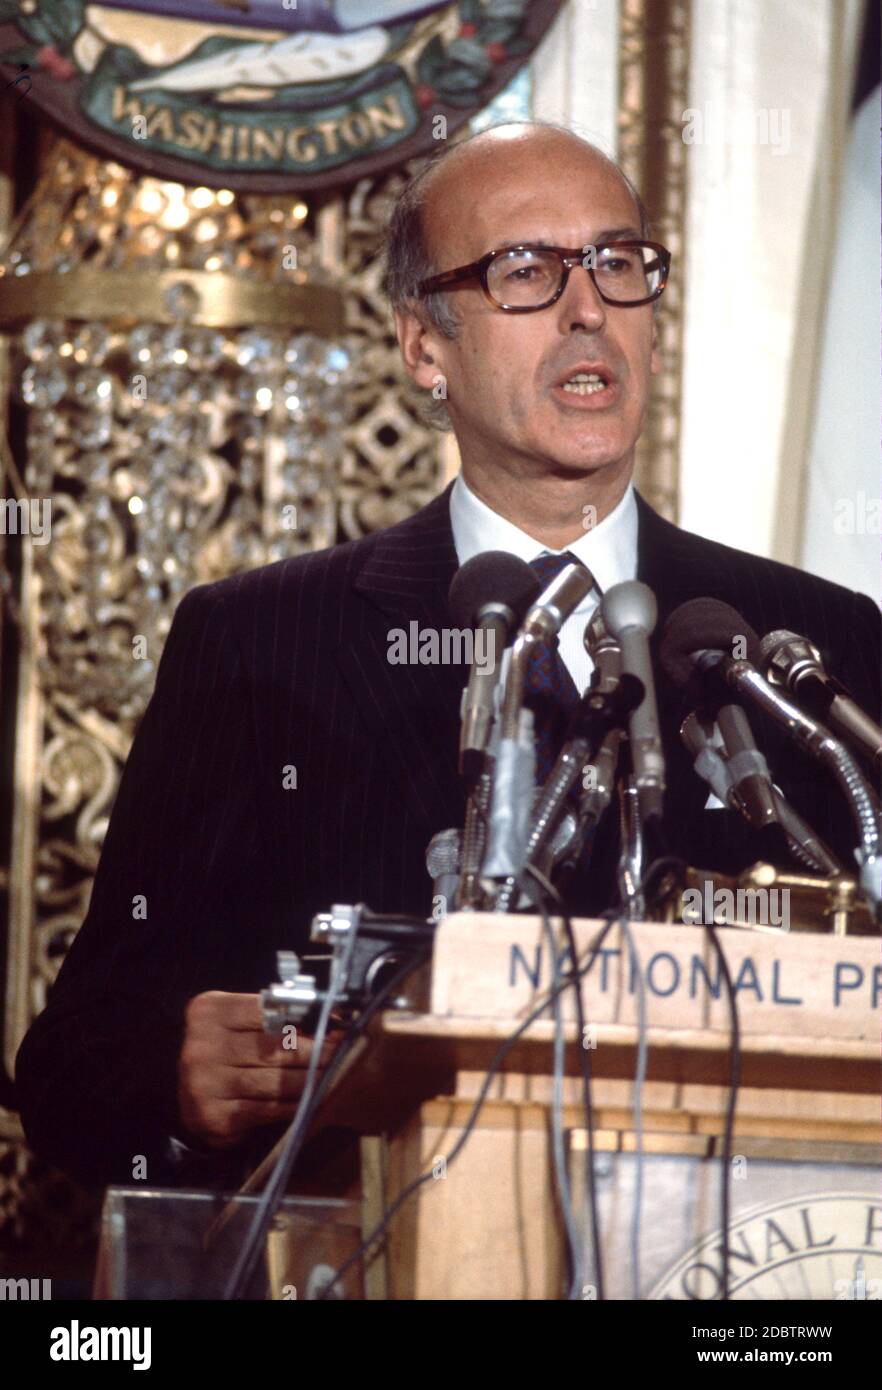 President Valéry Giscard d'Estaing of France addresses a breakfast meeting at the National Press Club in Washington, DC on May 20, 1976.  The President is in Washington for a State Visit.Credit: Barry Soorenko / CNP /MediaPunch Stock Photo